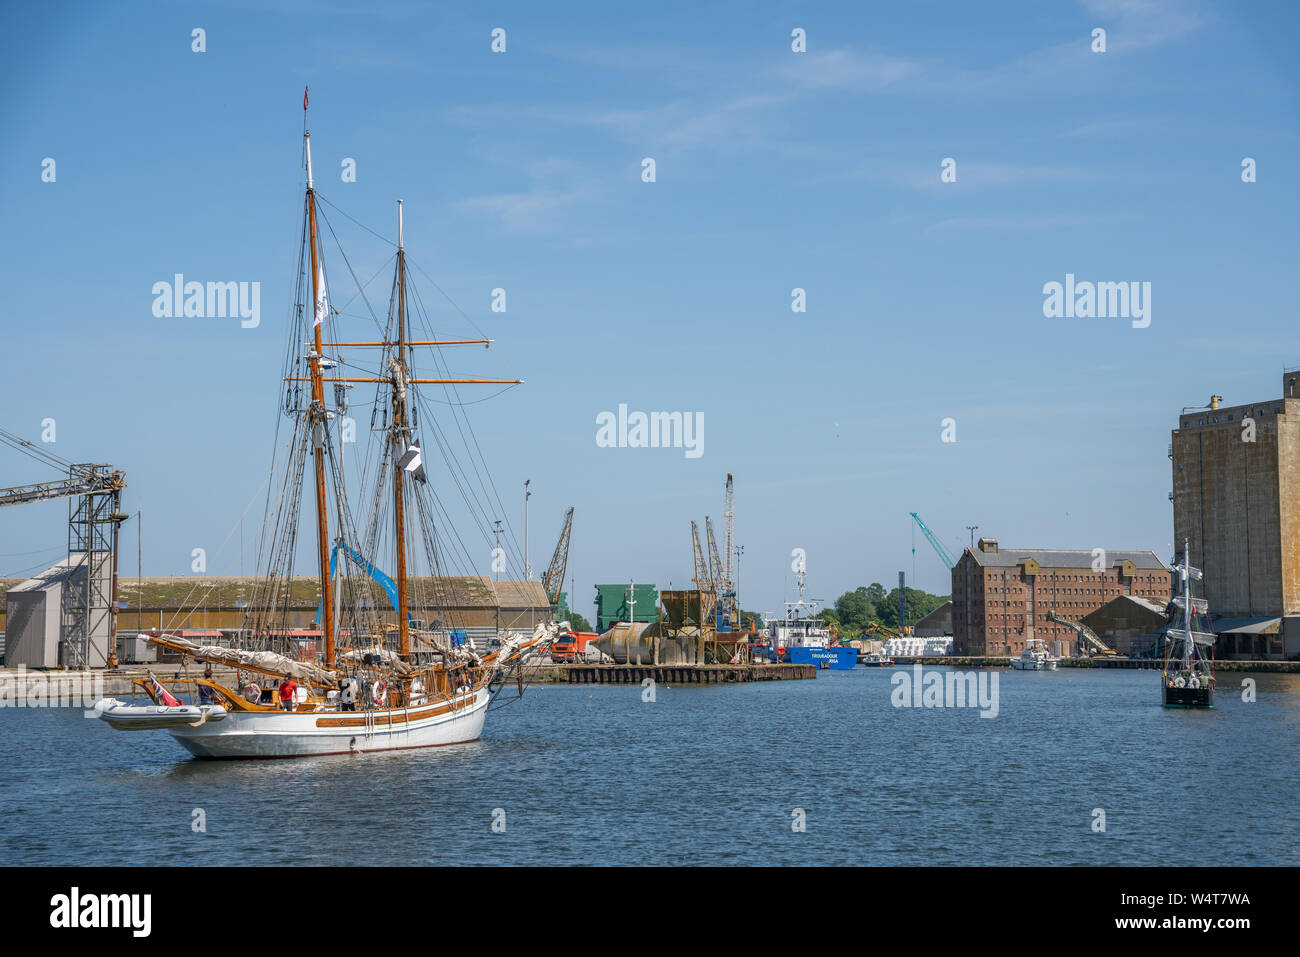 The sailing ship Anny in Sharpness Docks in Gloucestershire, United Kingdom Stock Photo